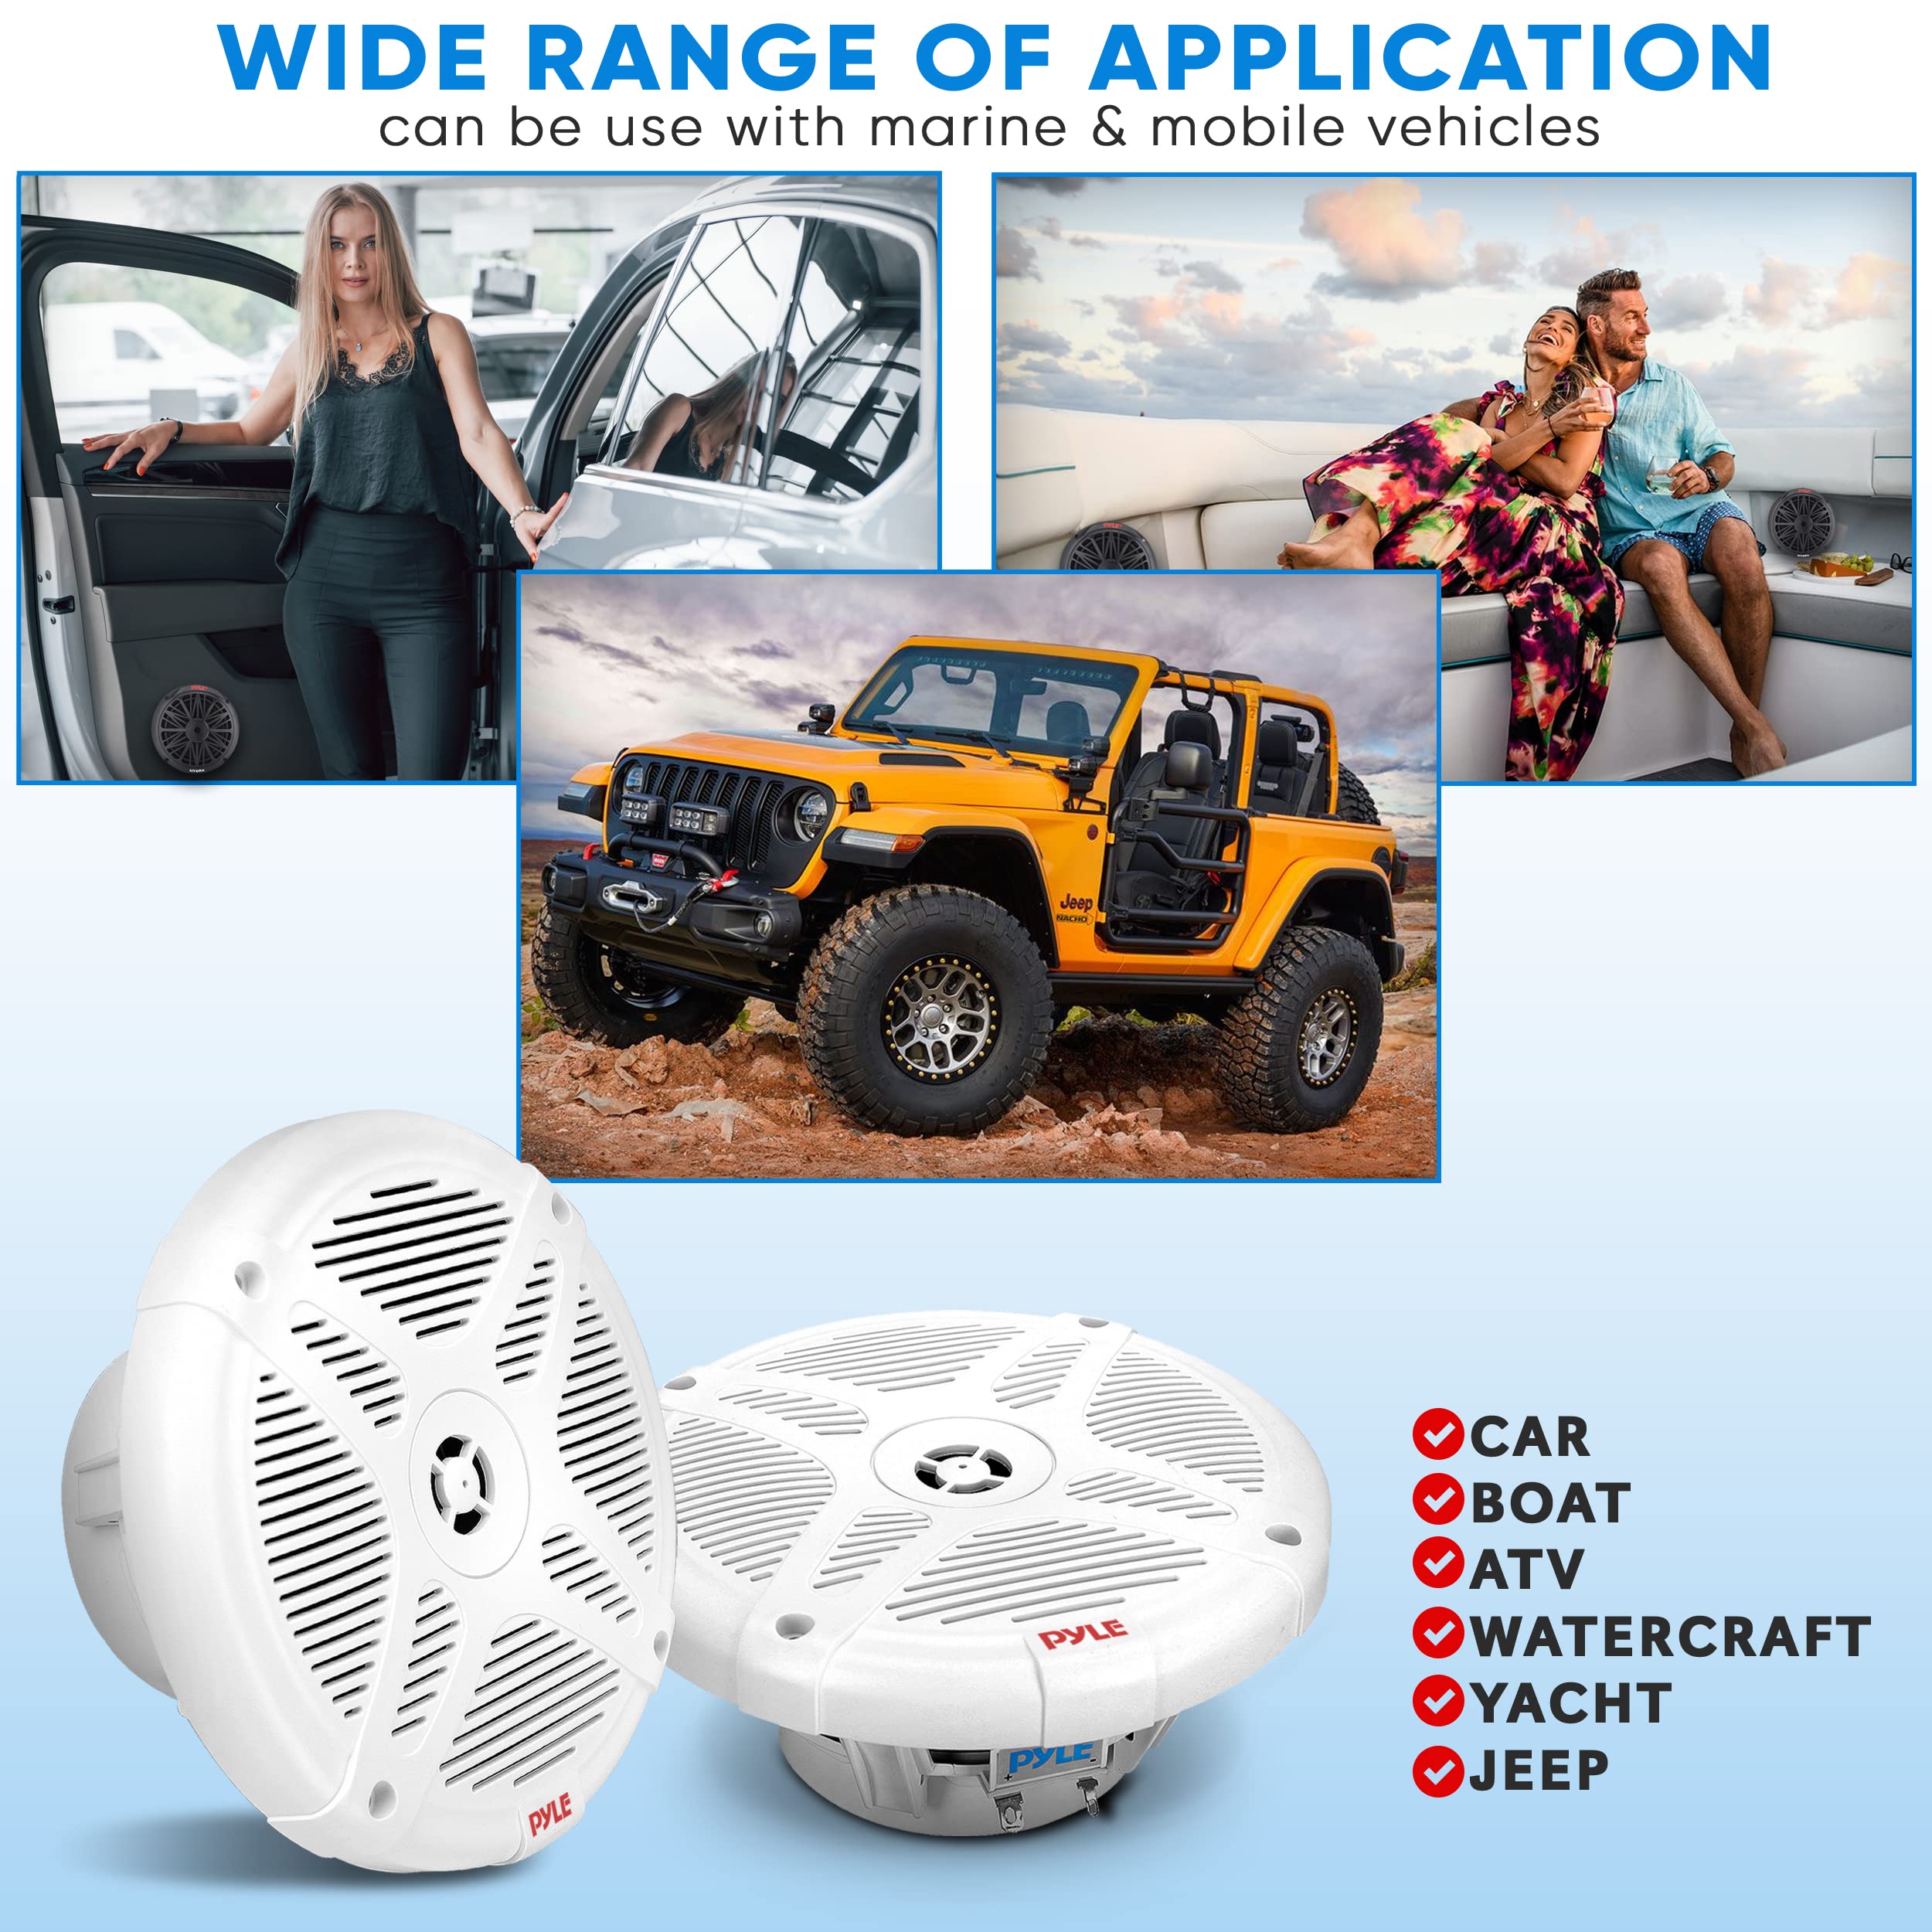 PyleUsa Waterproof Rated Off-Road Speakers - 6.5'' Marine Speakers w/Wireless BT Remote Control Receiver, Compact Dual Vehicle Speaker System for ATV, UTV, 4x4, Jeep, Powersports Vehicles - PLMRKT401